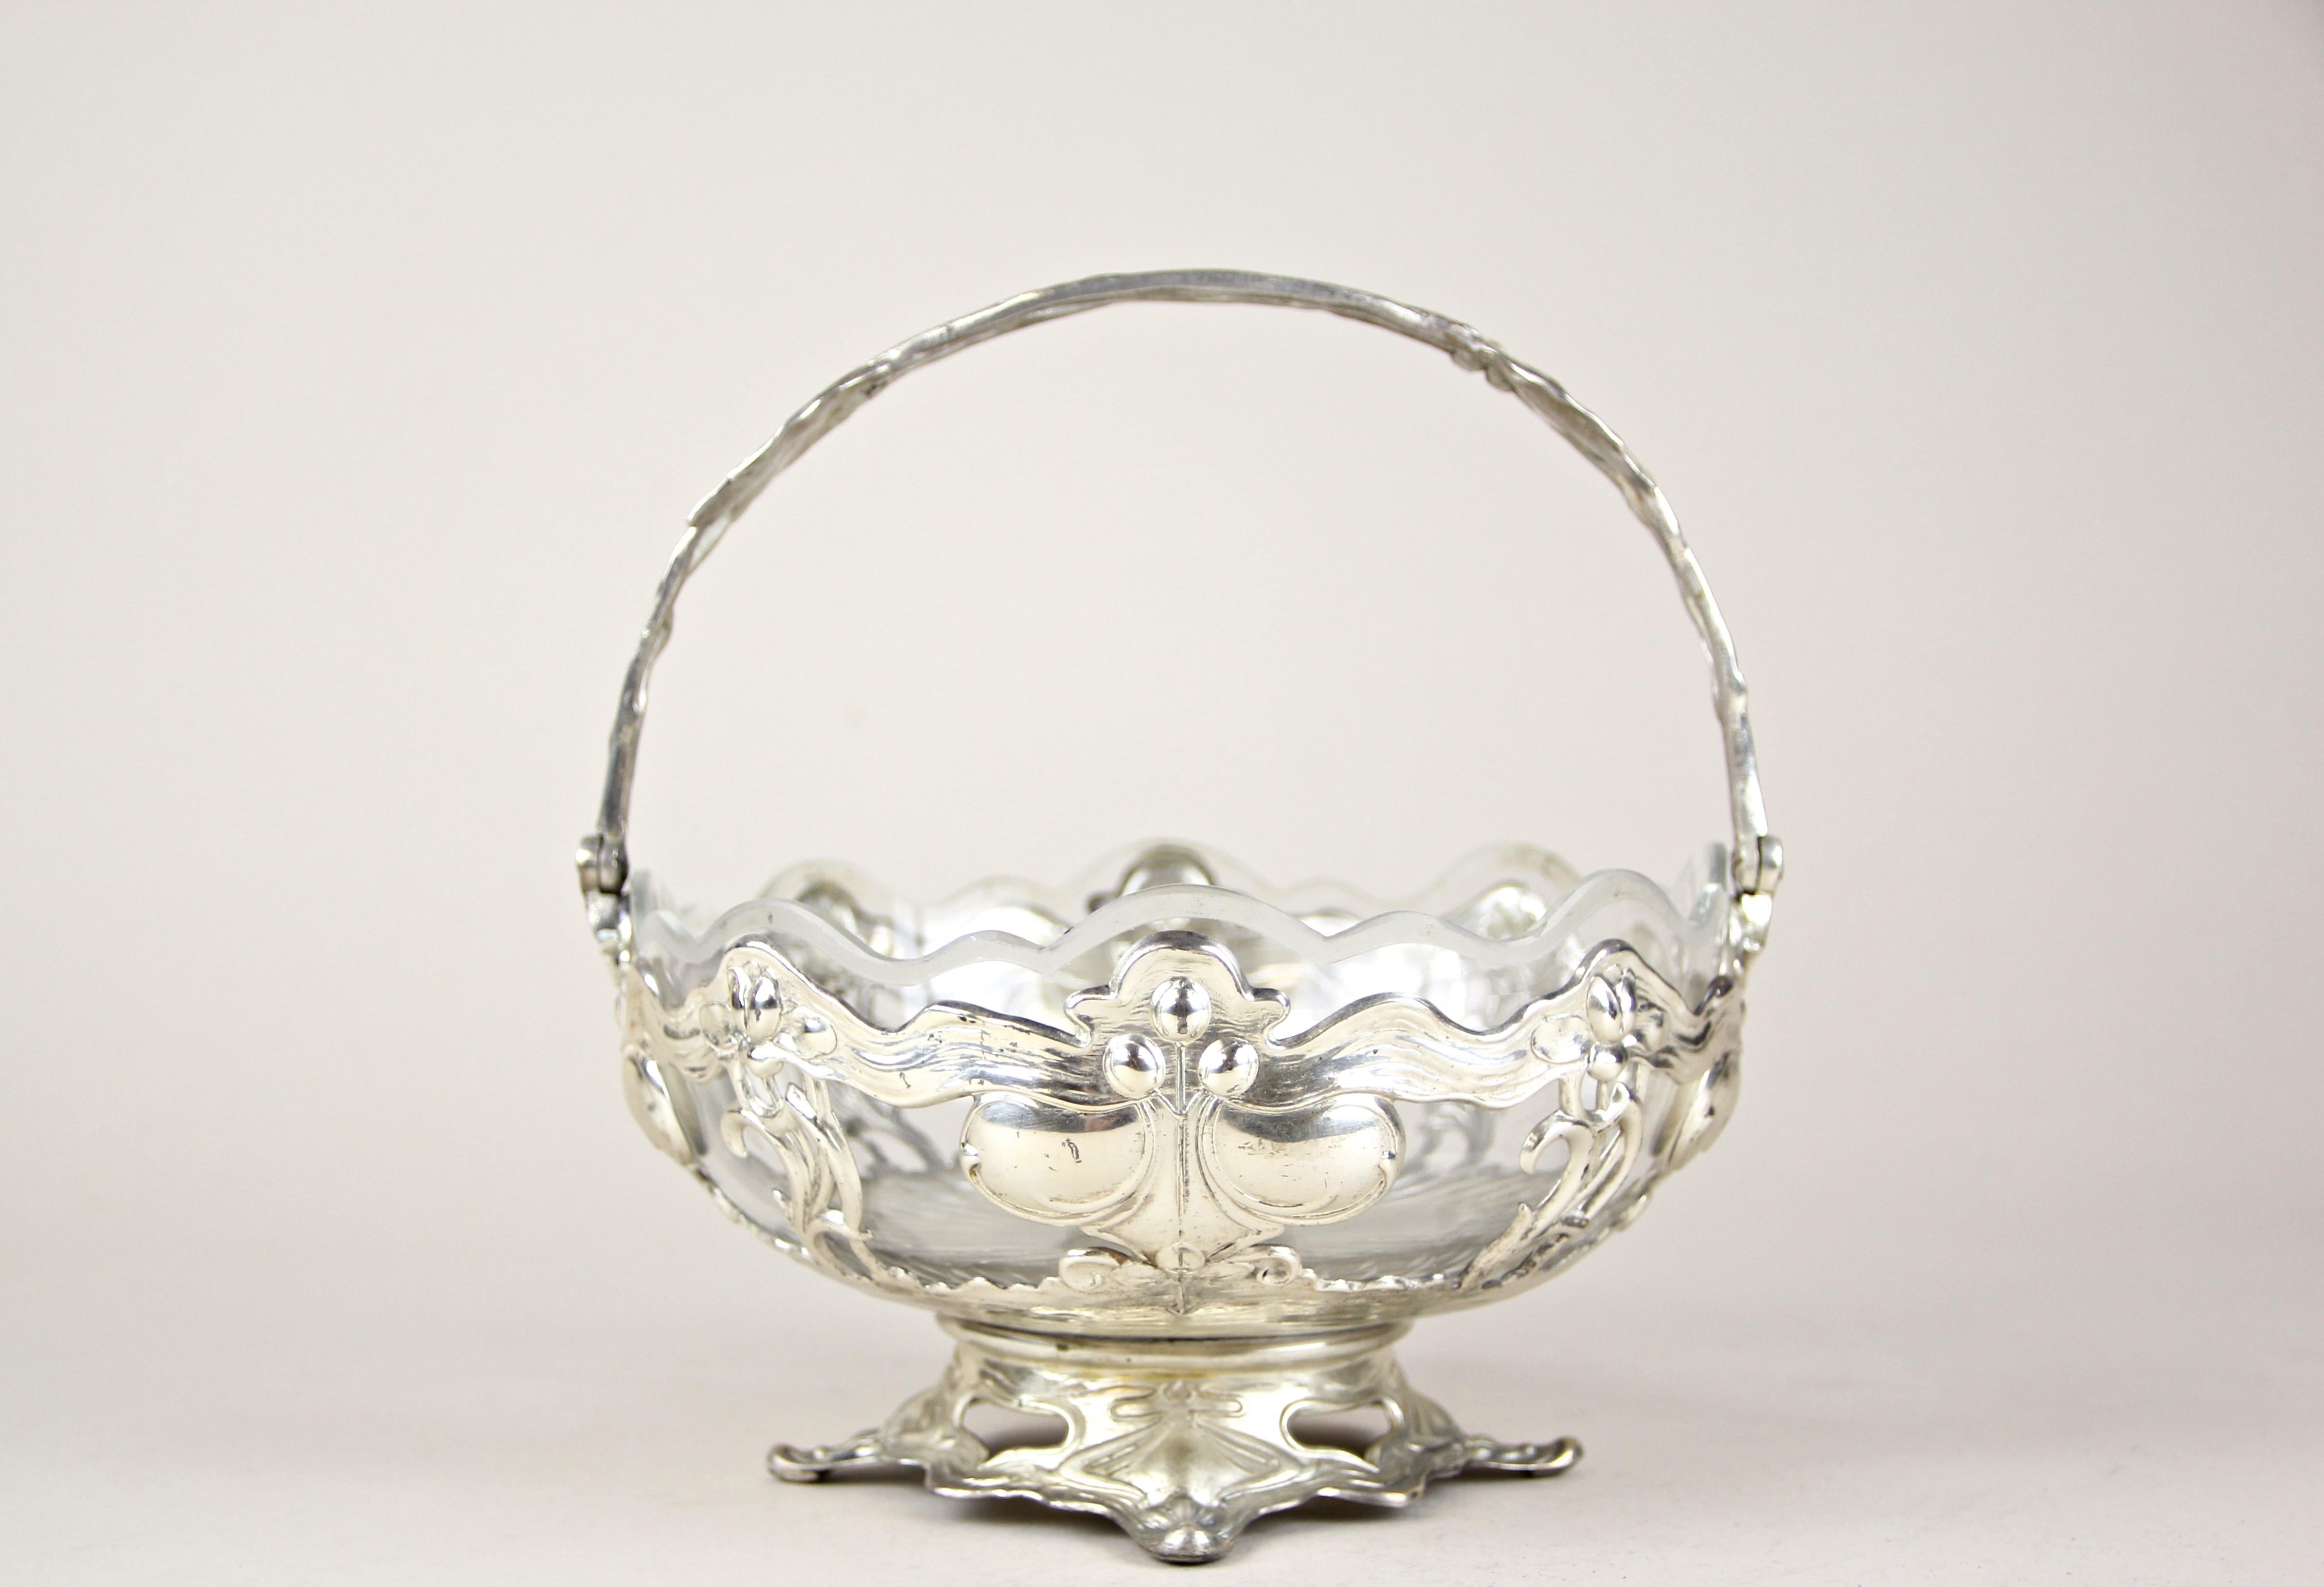 Very adorable silvered centerpiece with cut glass bowl by A. Köhler & Cie (WMF) out of the secession period in Vienna, circa 1905. An absolute amazing designed centerpiece showing typical lines of this famous era. Nestled in the beautiful open